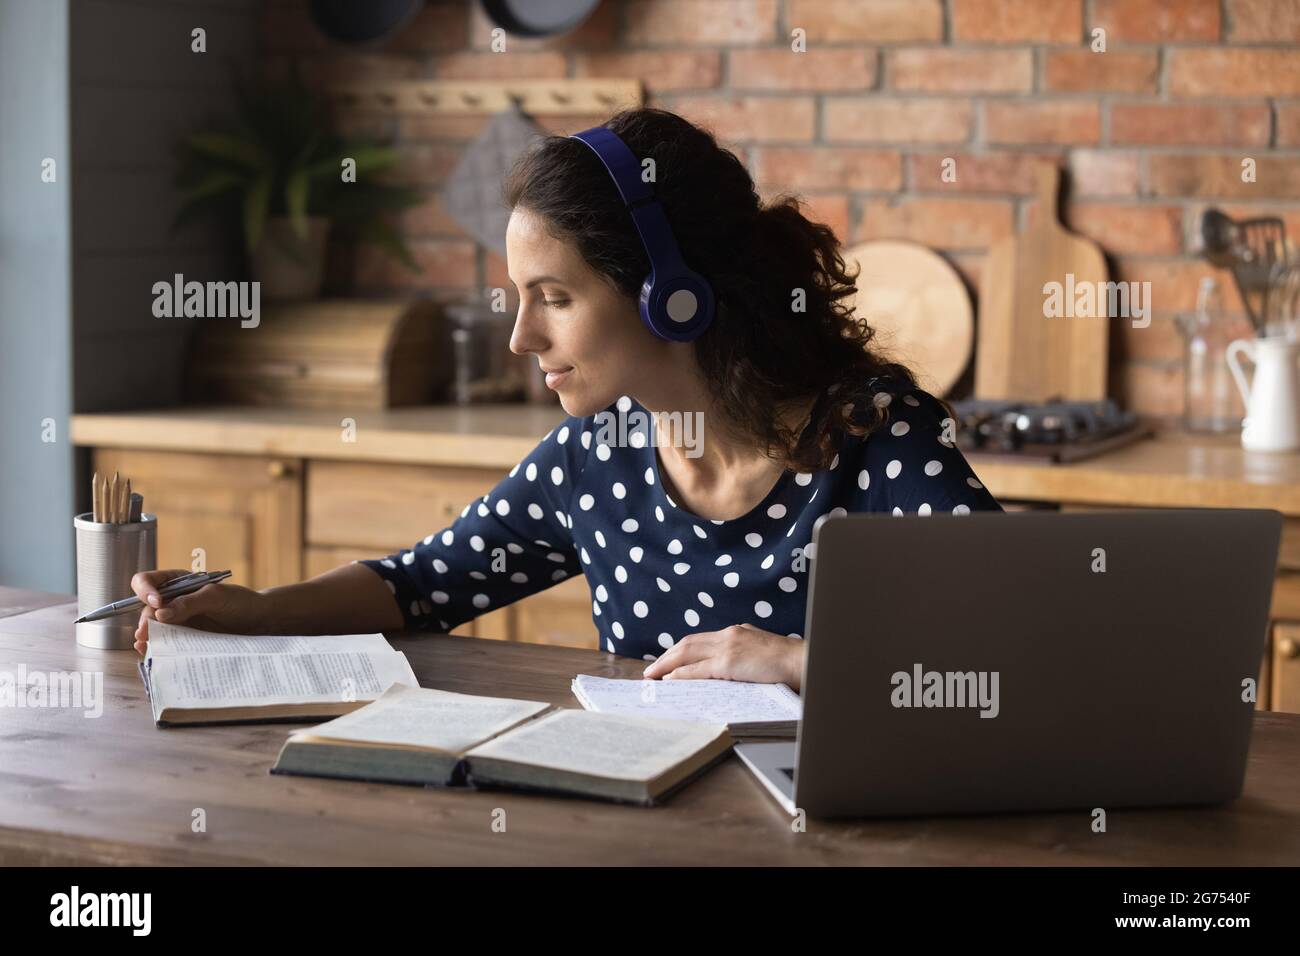 Focused student woman using headphones and laptop Stock Photo